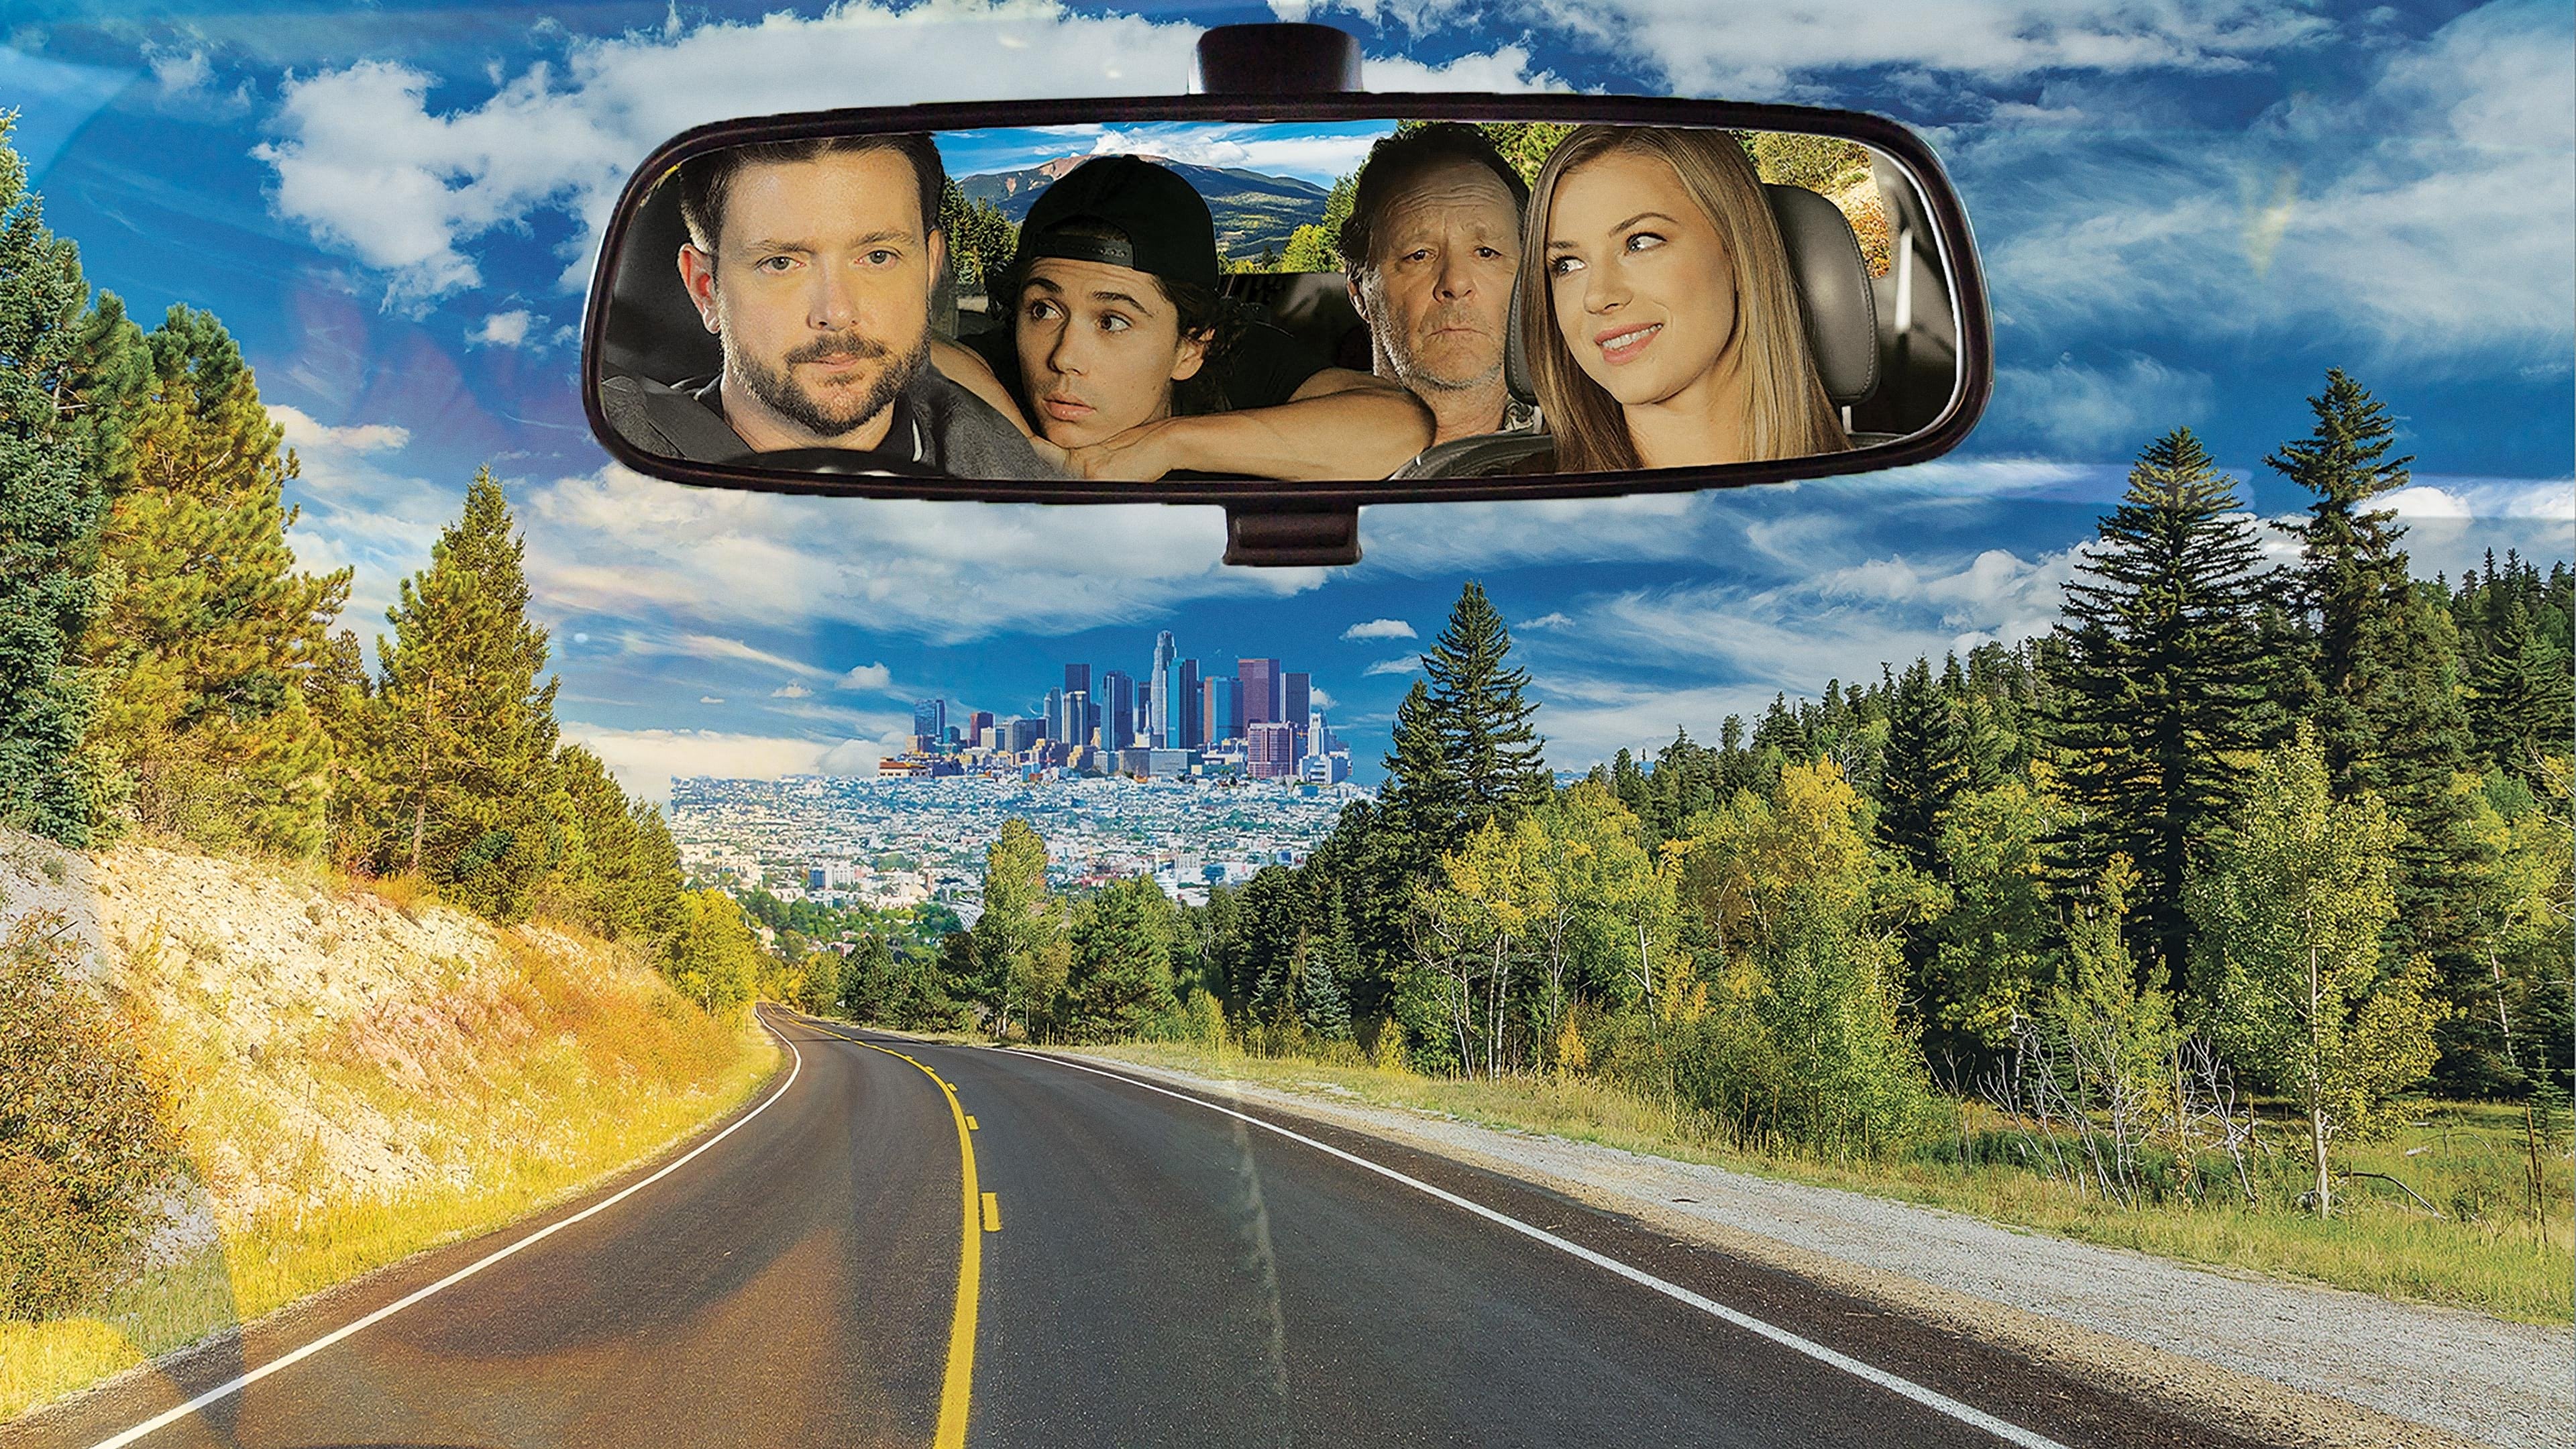 Roads, Trees and Honey Bees 2019 123movies